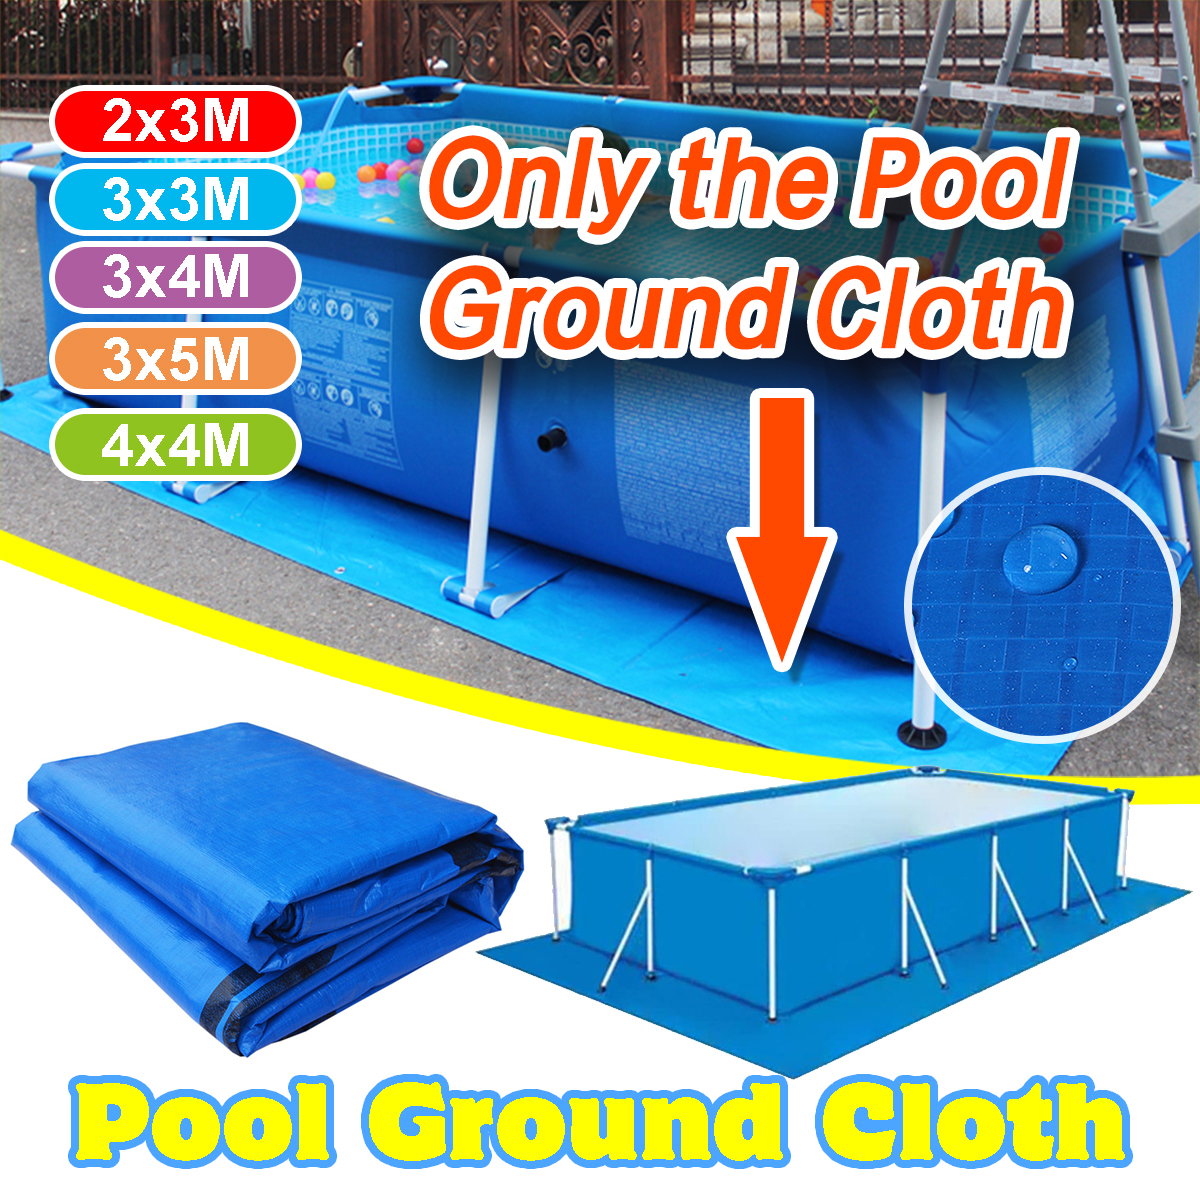 Swimming-Pool-Square-Ground-Cloth-Cover-Dustproof-Waterproof-Anti-ultraviolet-Outdoor-Protection-Flo-1956594-1